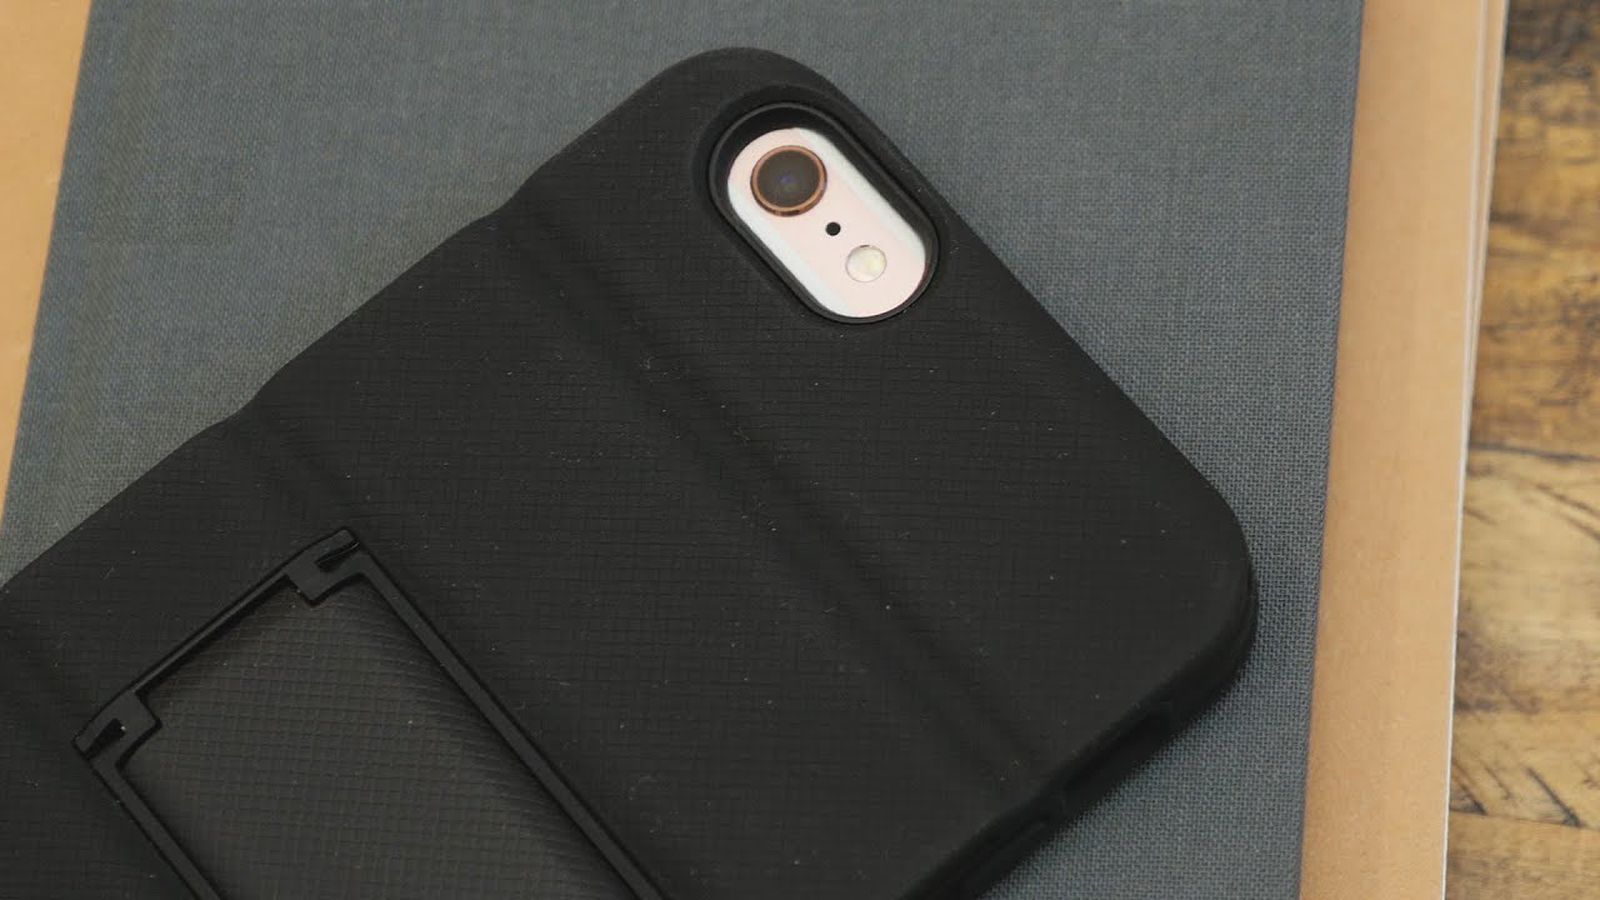 Video Review: The iLuv Layup X is a Solid Multi-Functional Case for the iPhone 6s Plus